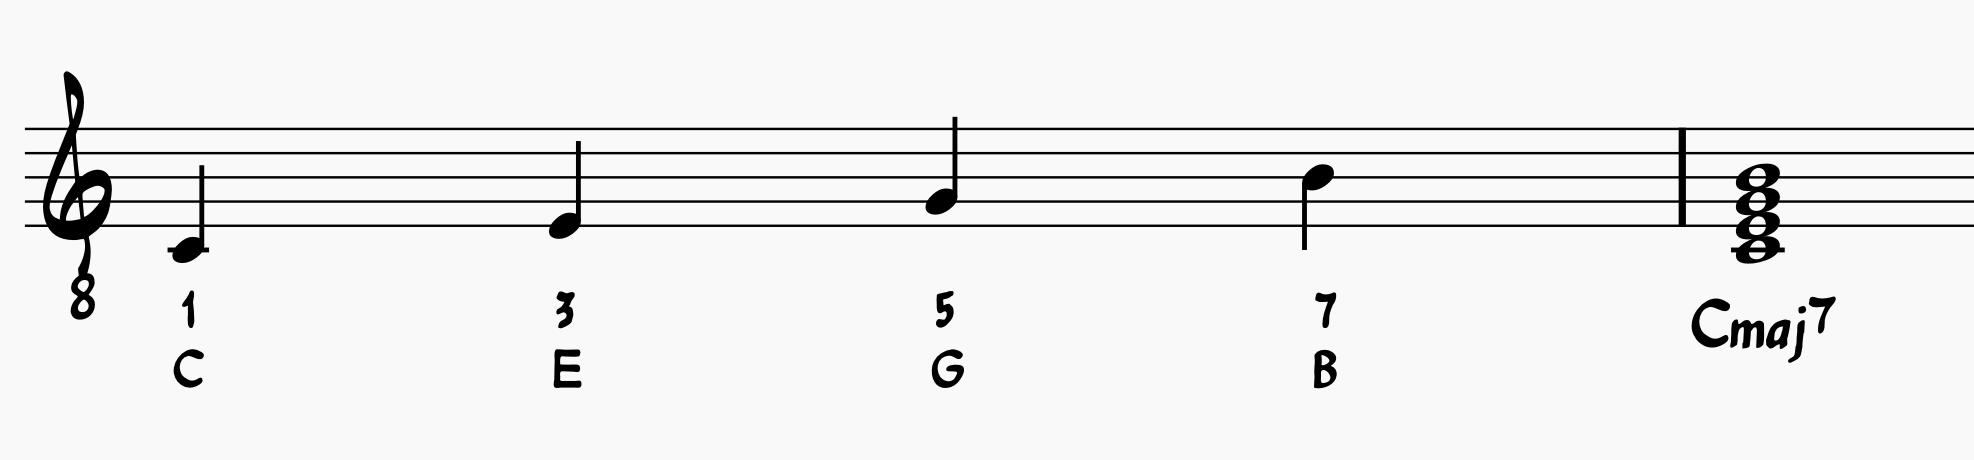 Root, third, fifth, and seventh making a C major seventh chord